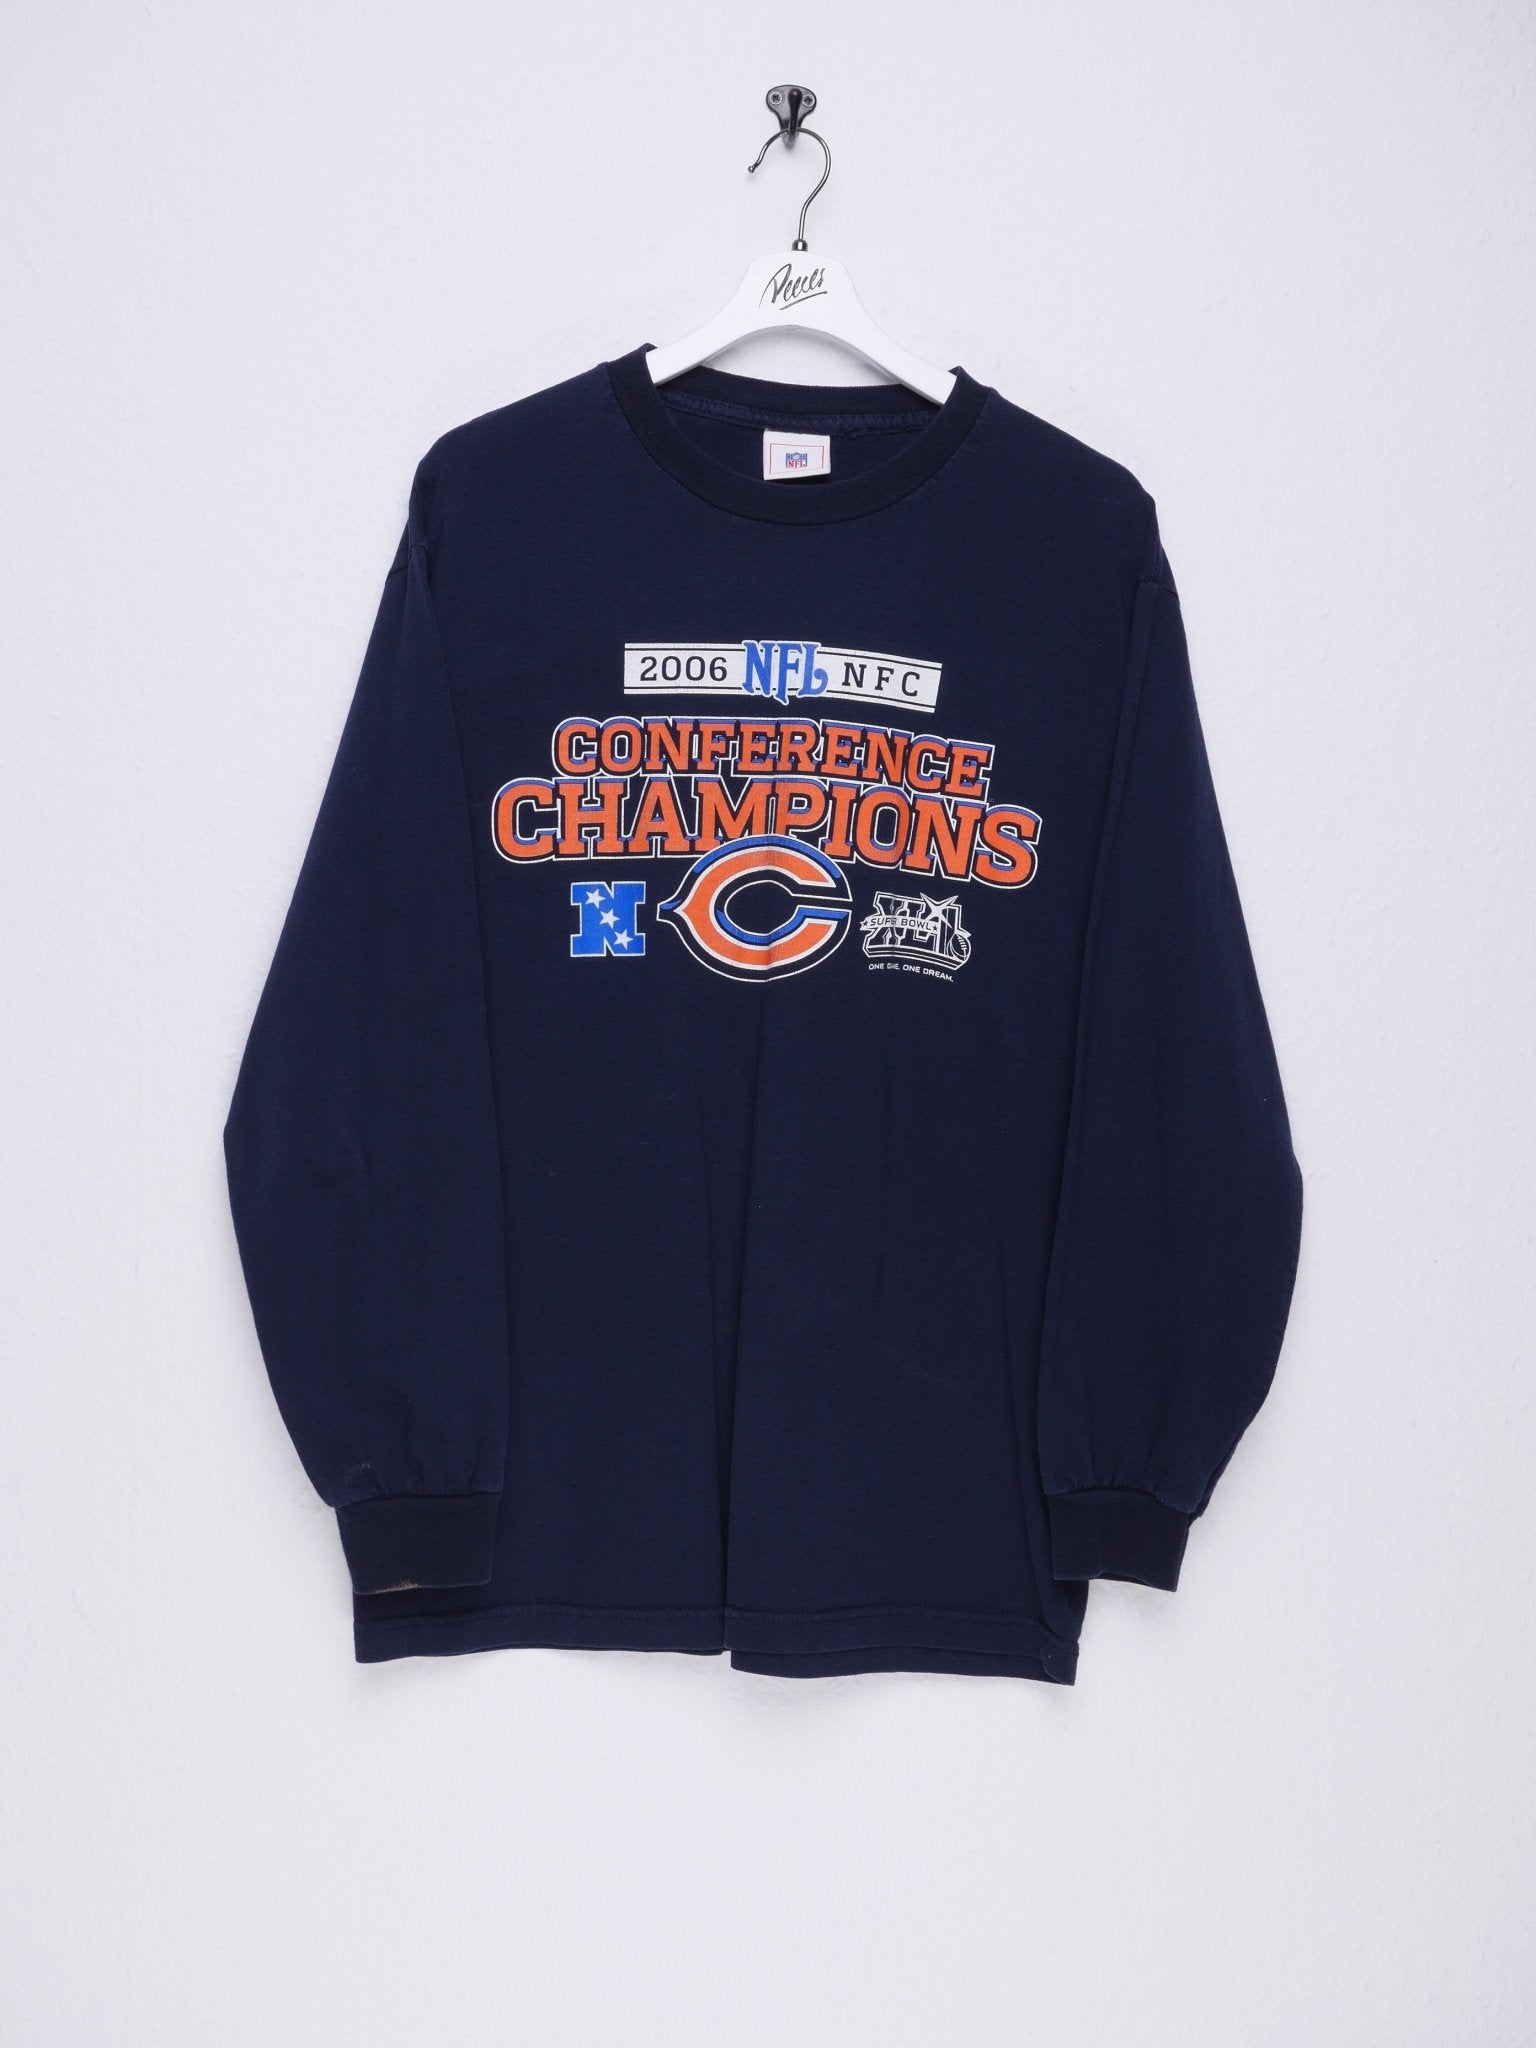 nfl 'Conference Champions' printed Graphic navy L/S Shirt - Peeces